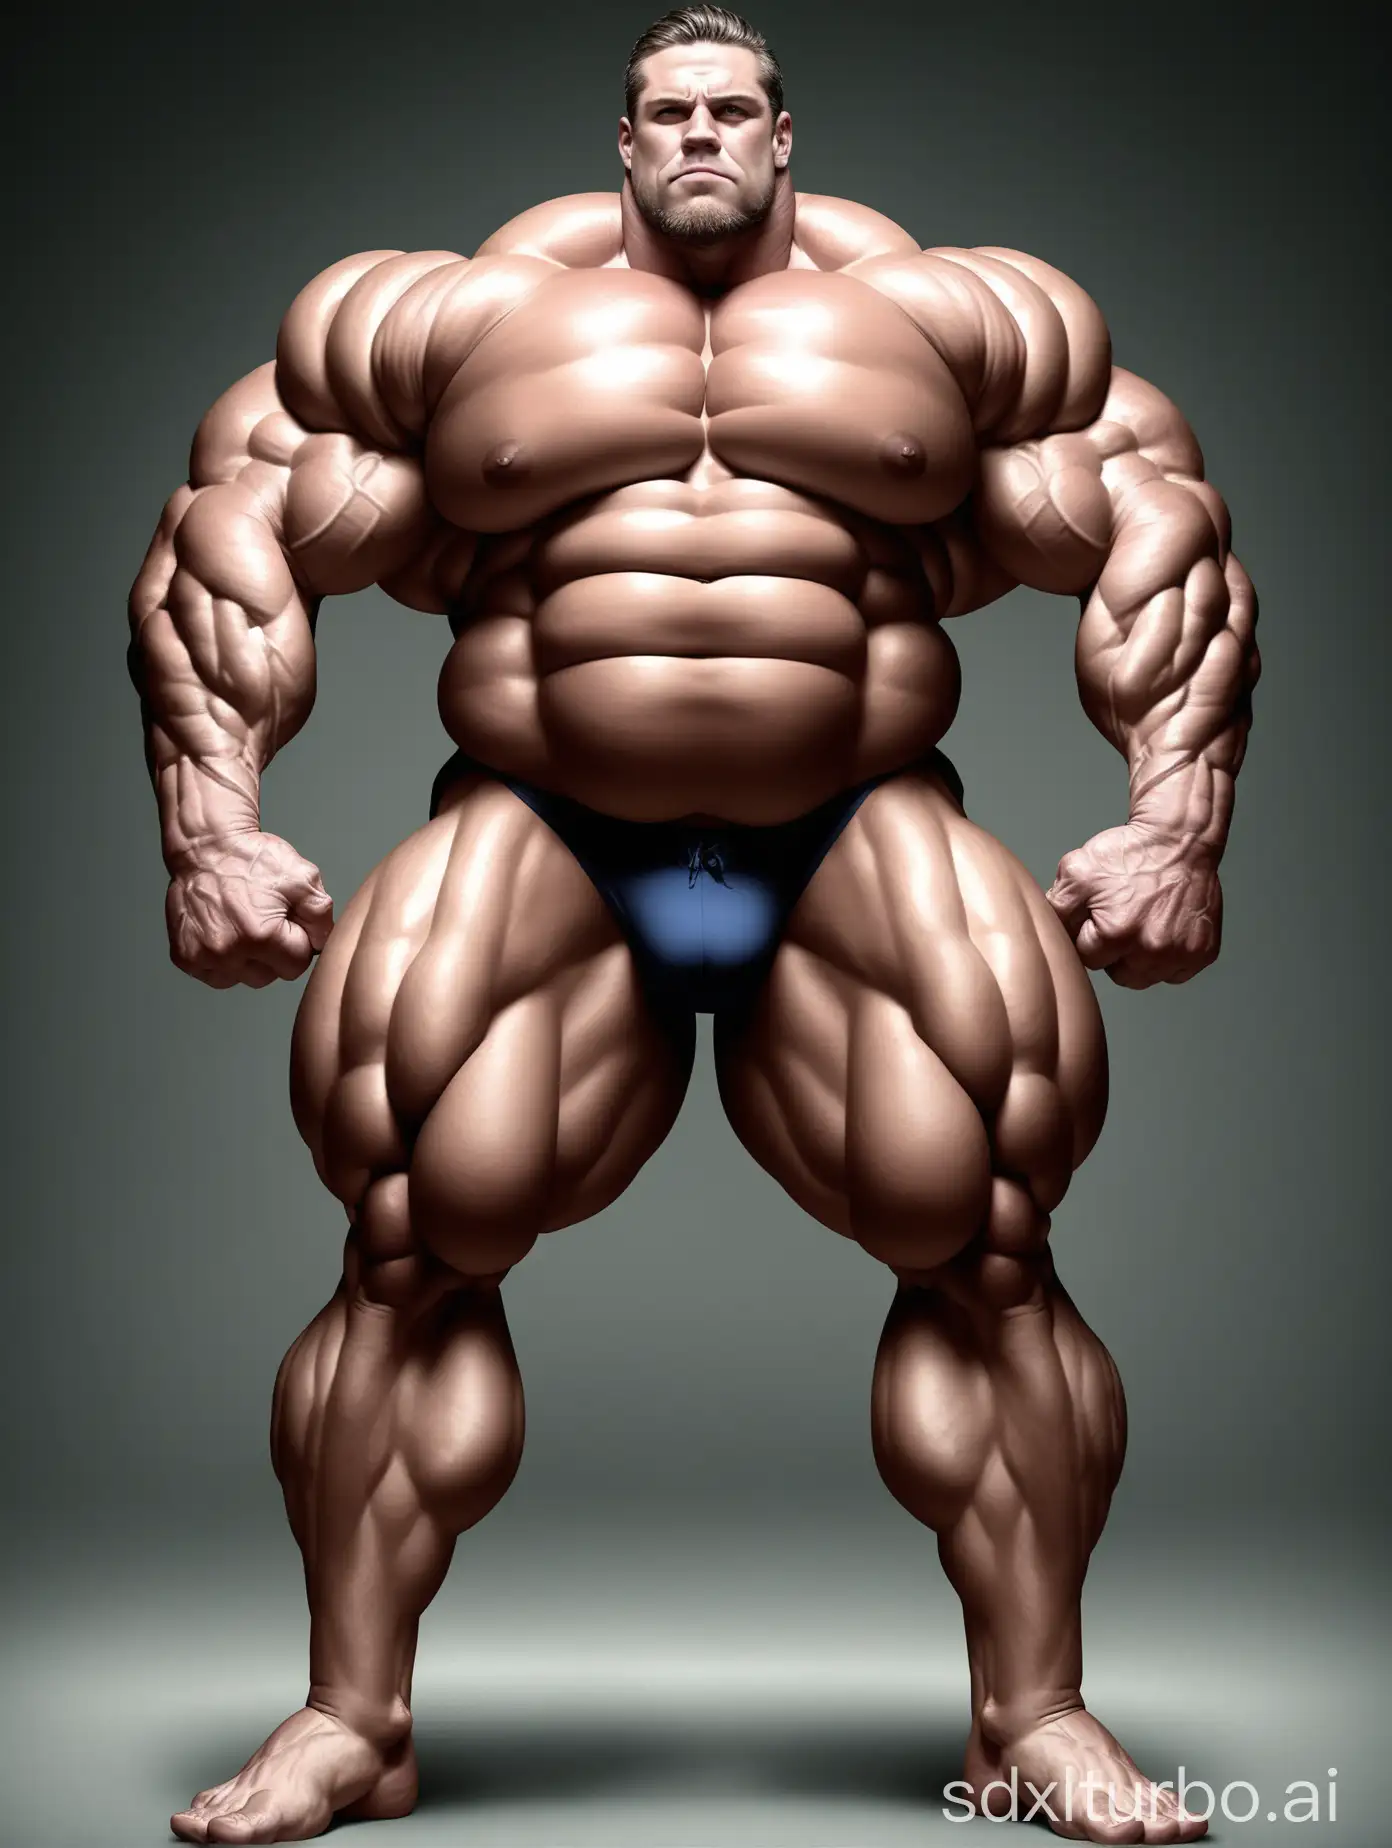 White skin and massive muscle stud，Huge and giant and Strong body，Very strong legs， 2m tall，very Big Chest，very Big biceps，very 8-pack abs，Very Massive muscle Body，Wearing underwear，he is giant tall，very fat，very fat，Full Body，very long strong legs， raise his arms to show his huge biceps ，raise his arms to show his huge biceps，very old man，long hair，very thick muscles，very thick body，